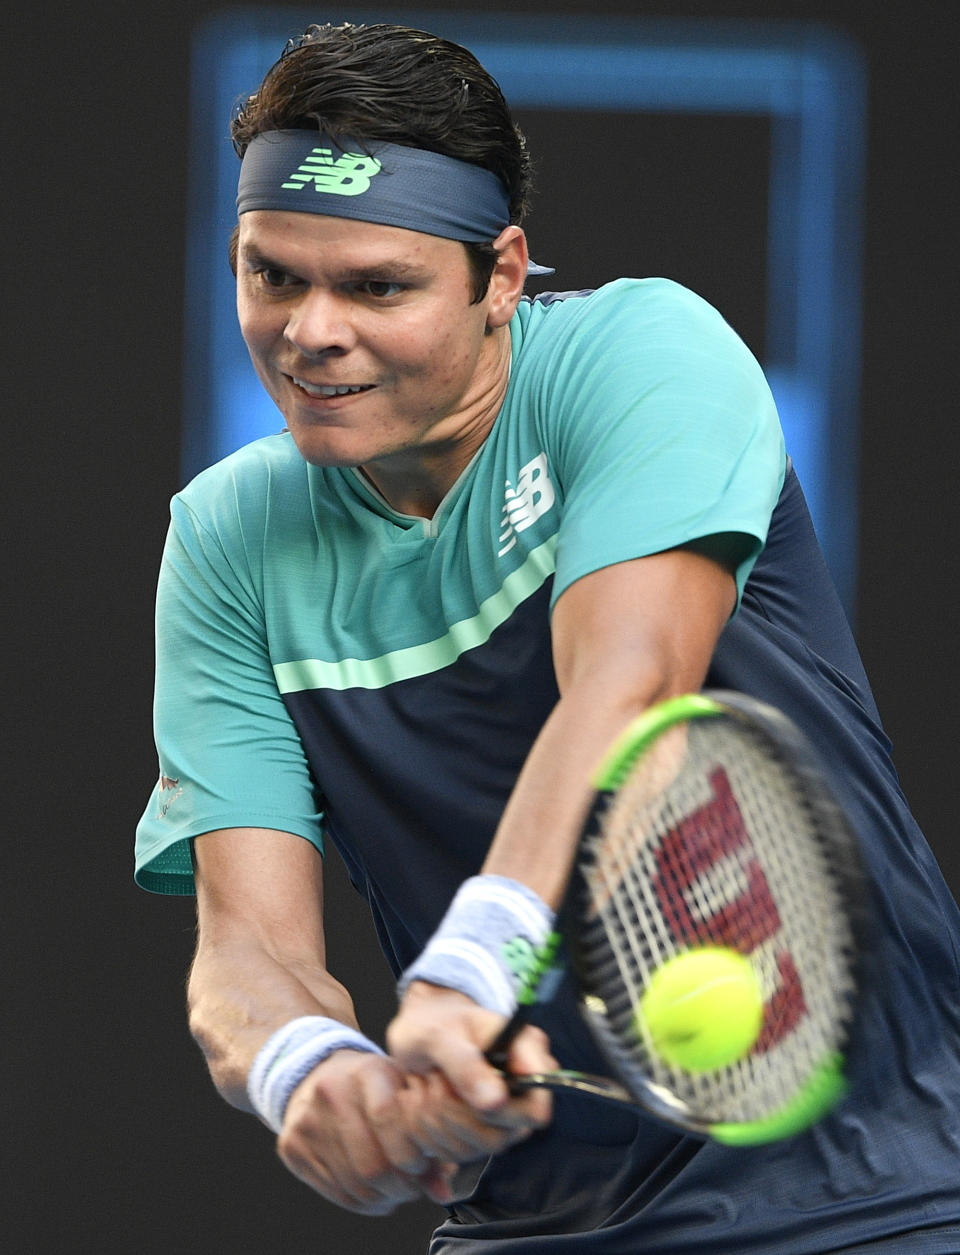 Canada's Milos Raonic makes a backhand return to France's Lucas Pouille during their quarterfinal match at the Australian Open tennis championships in Melbourne, Australia, Wednesday, Jan. 23, 2019. (AP Photo/Andy Brownbill)